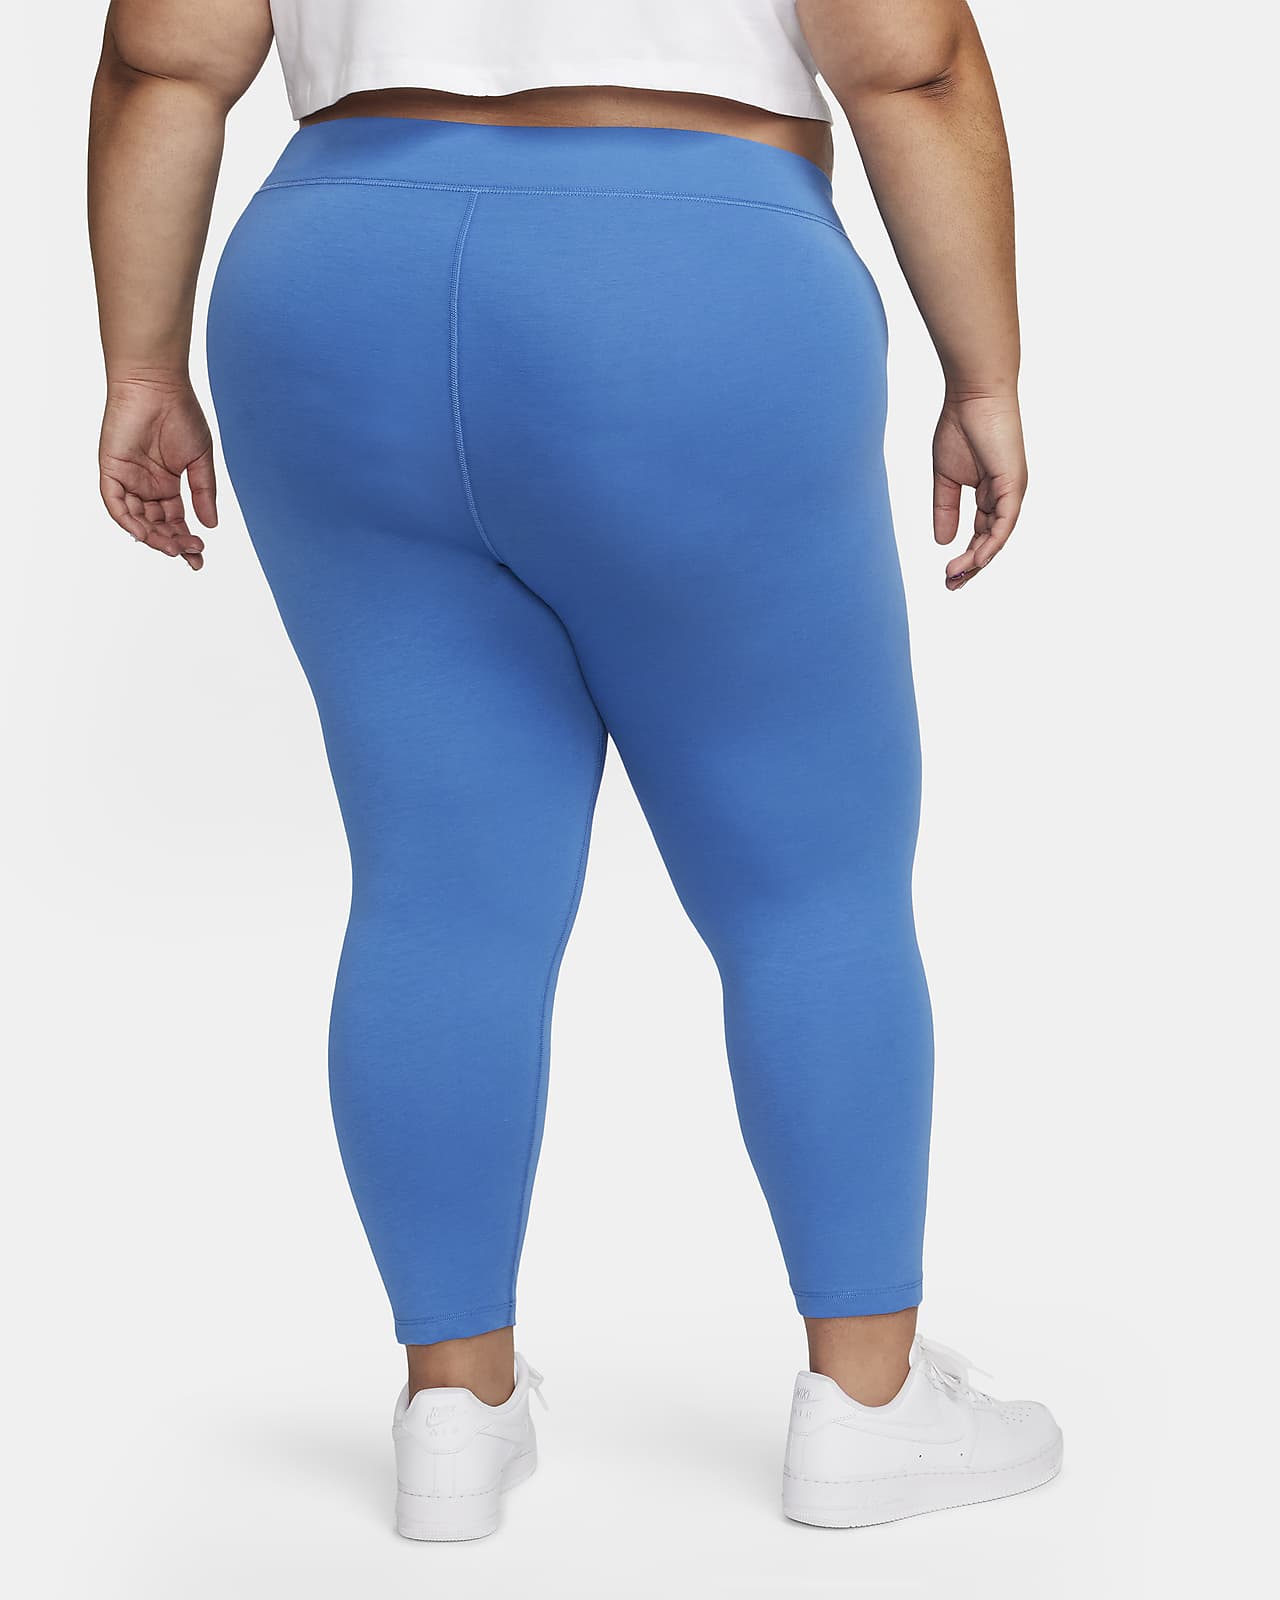 Nike Women's Sportswear Essential High-Waisted Graphic Leggings (Plus Size)  in Pink - ShopStyle